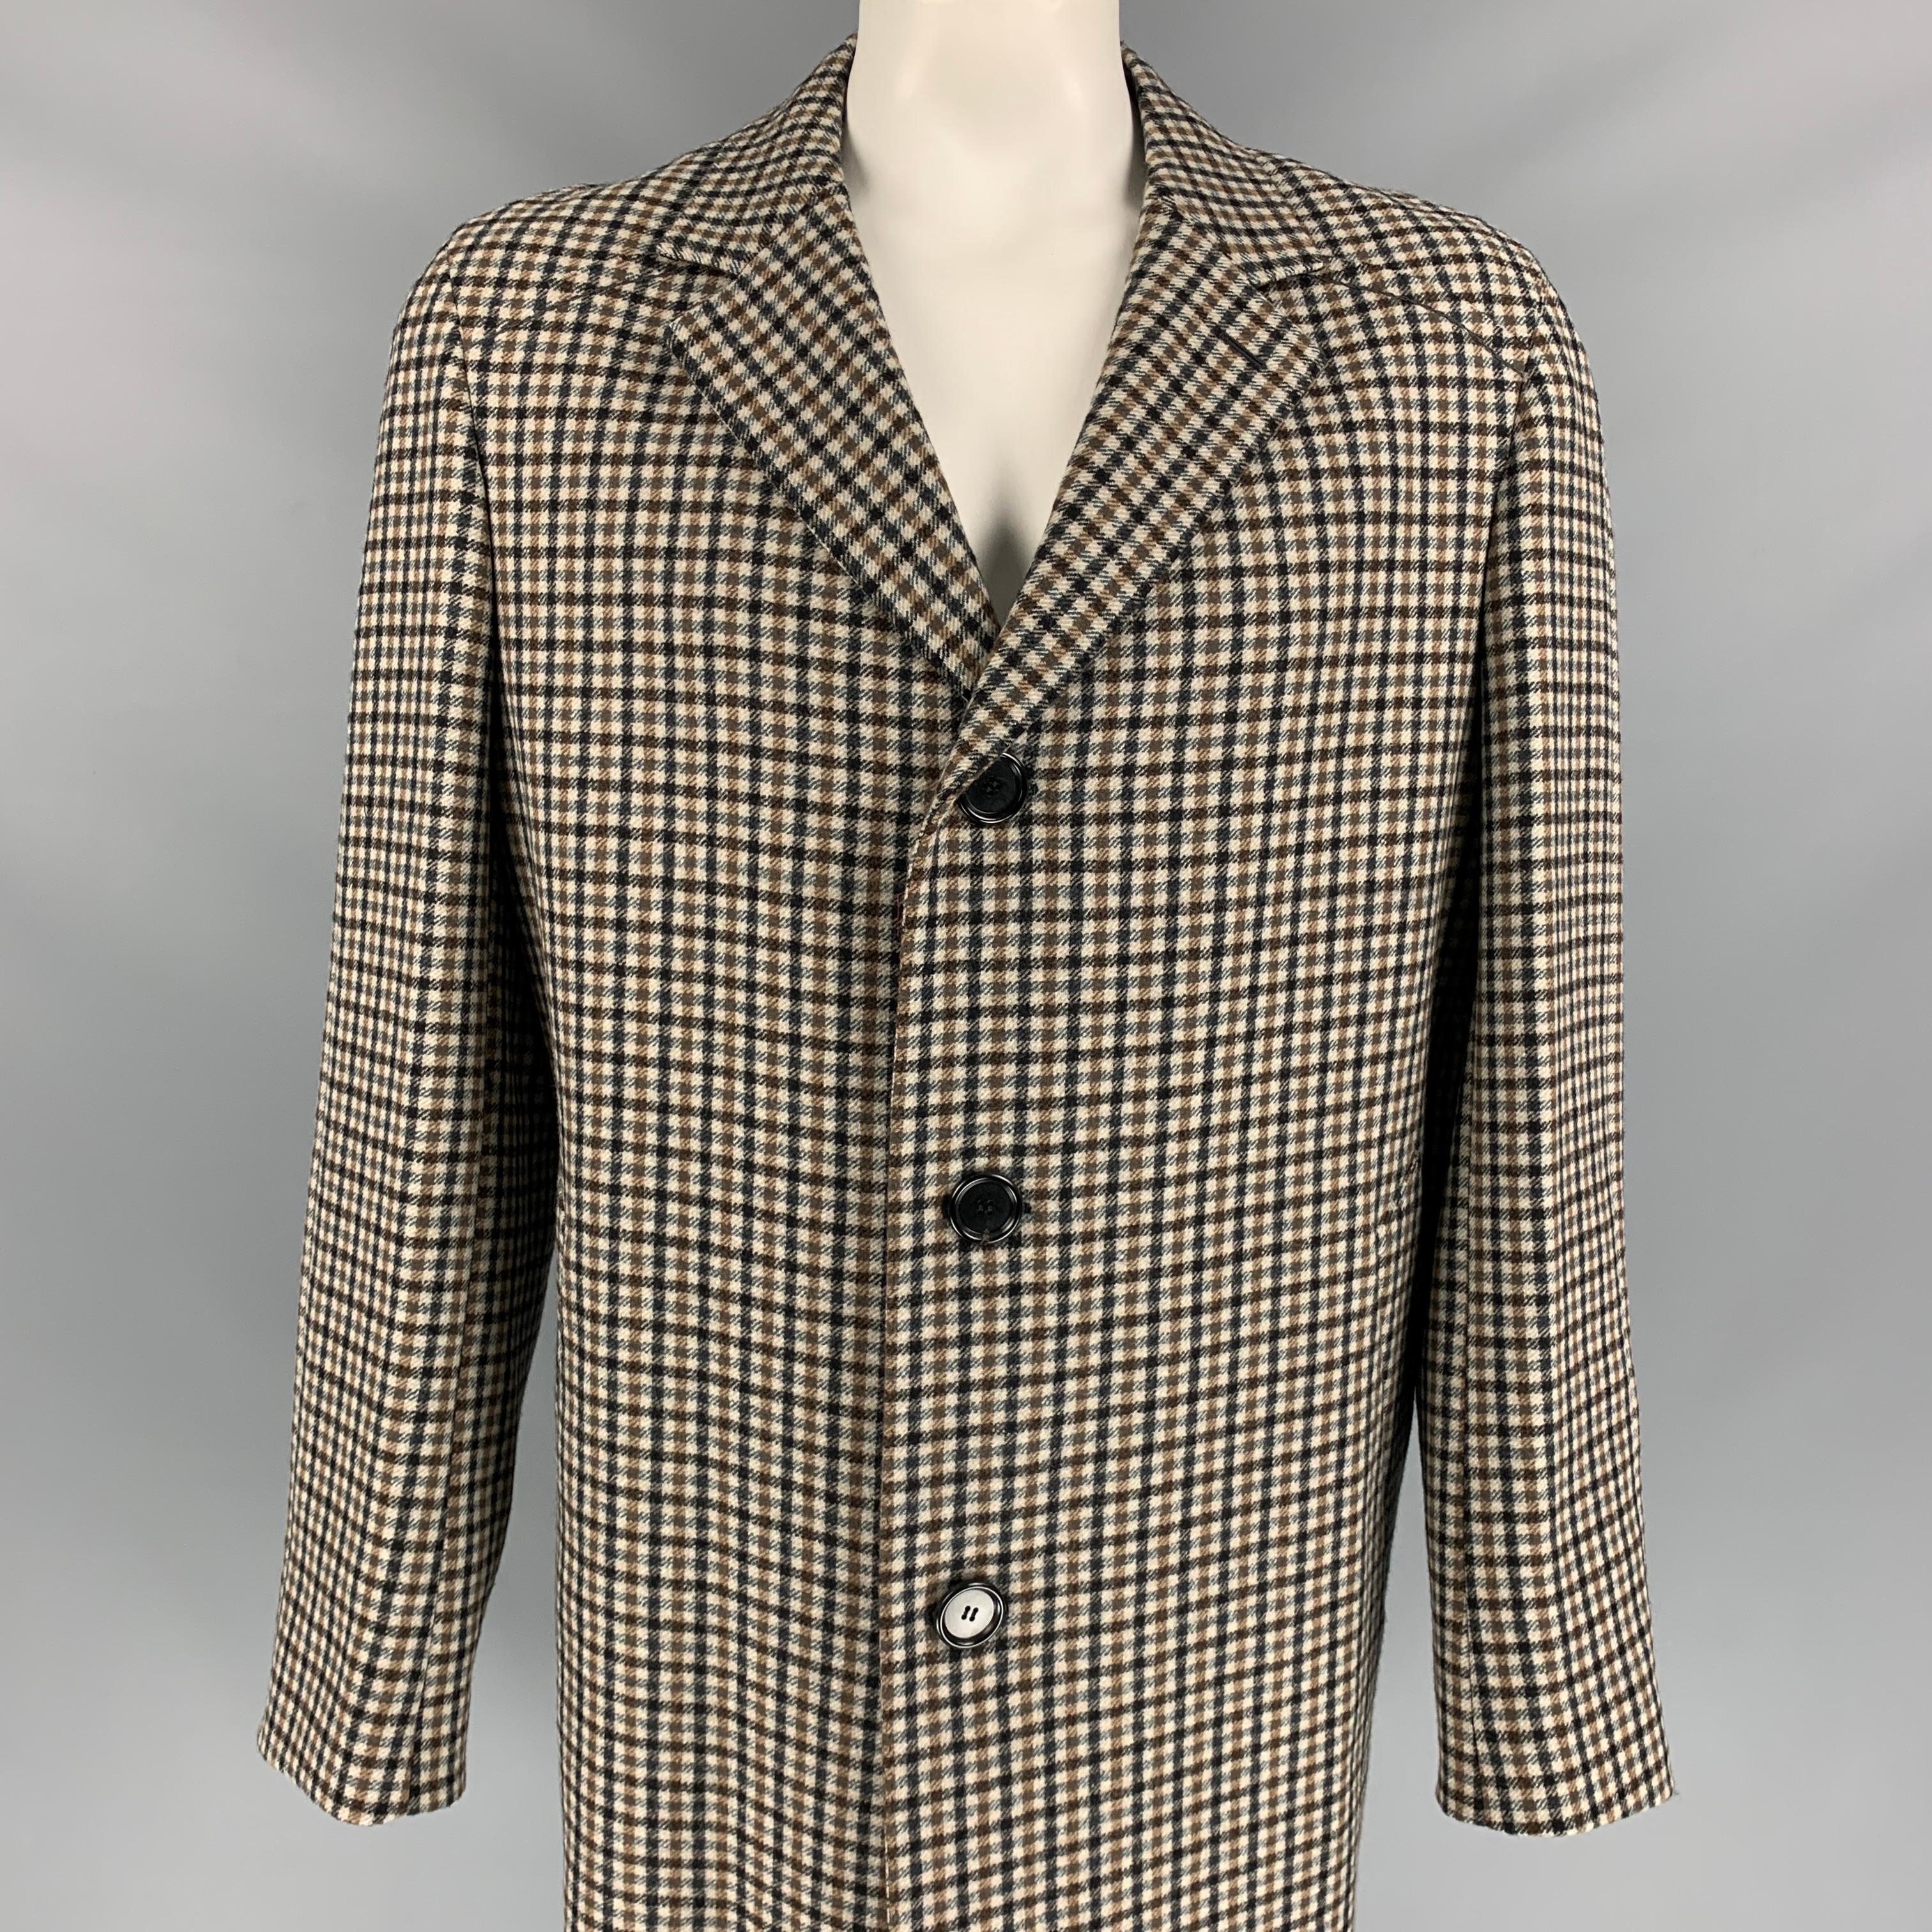 LANVIN coat comes in a oatmeal & black checkered wool with a full liner featuring a notch lapel, slit pockets, single back vent, and a buttoned closure. Made in Italy. 

Very Good Pre-Owned Condition.
Marked: 54 8 R

Measurements:

Shoulder: 19.5